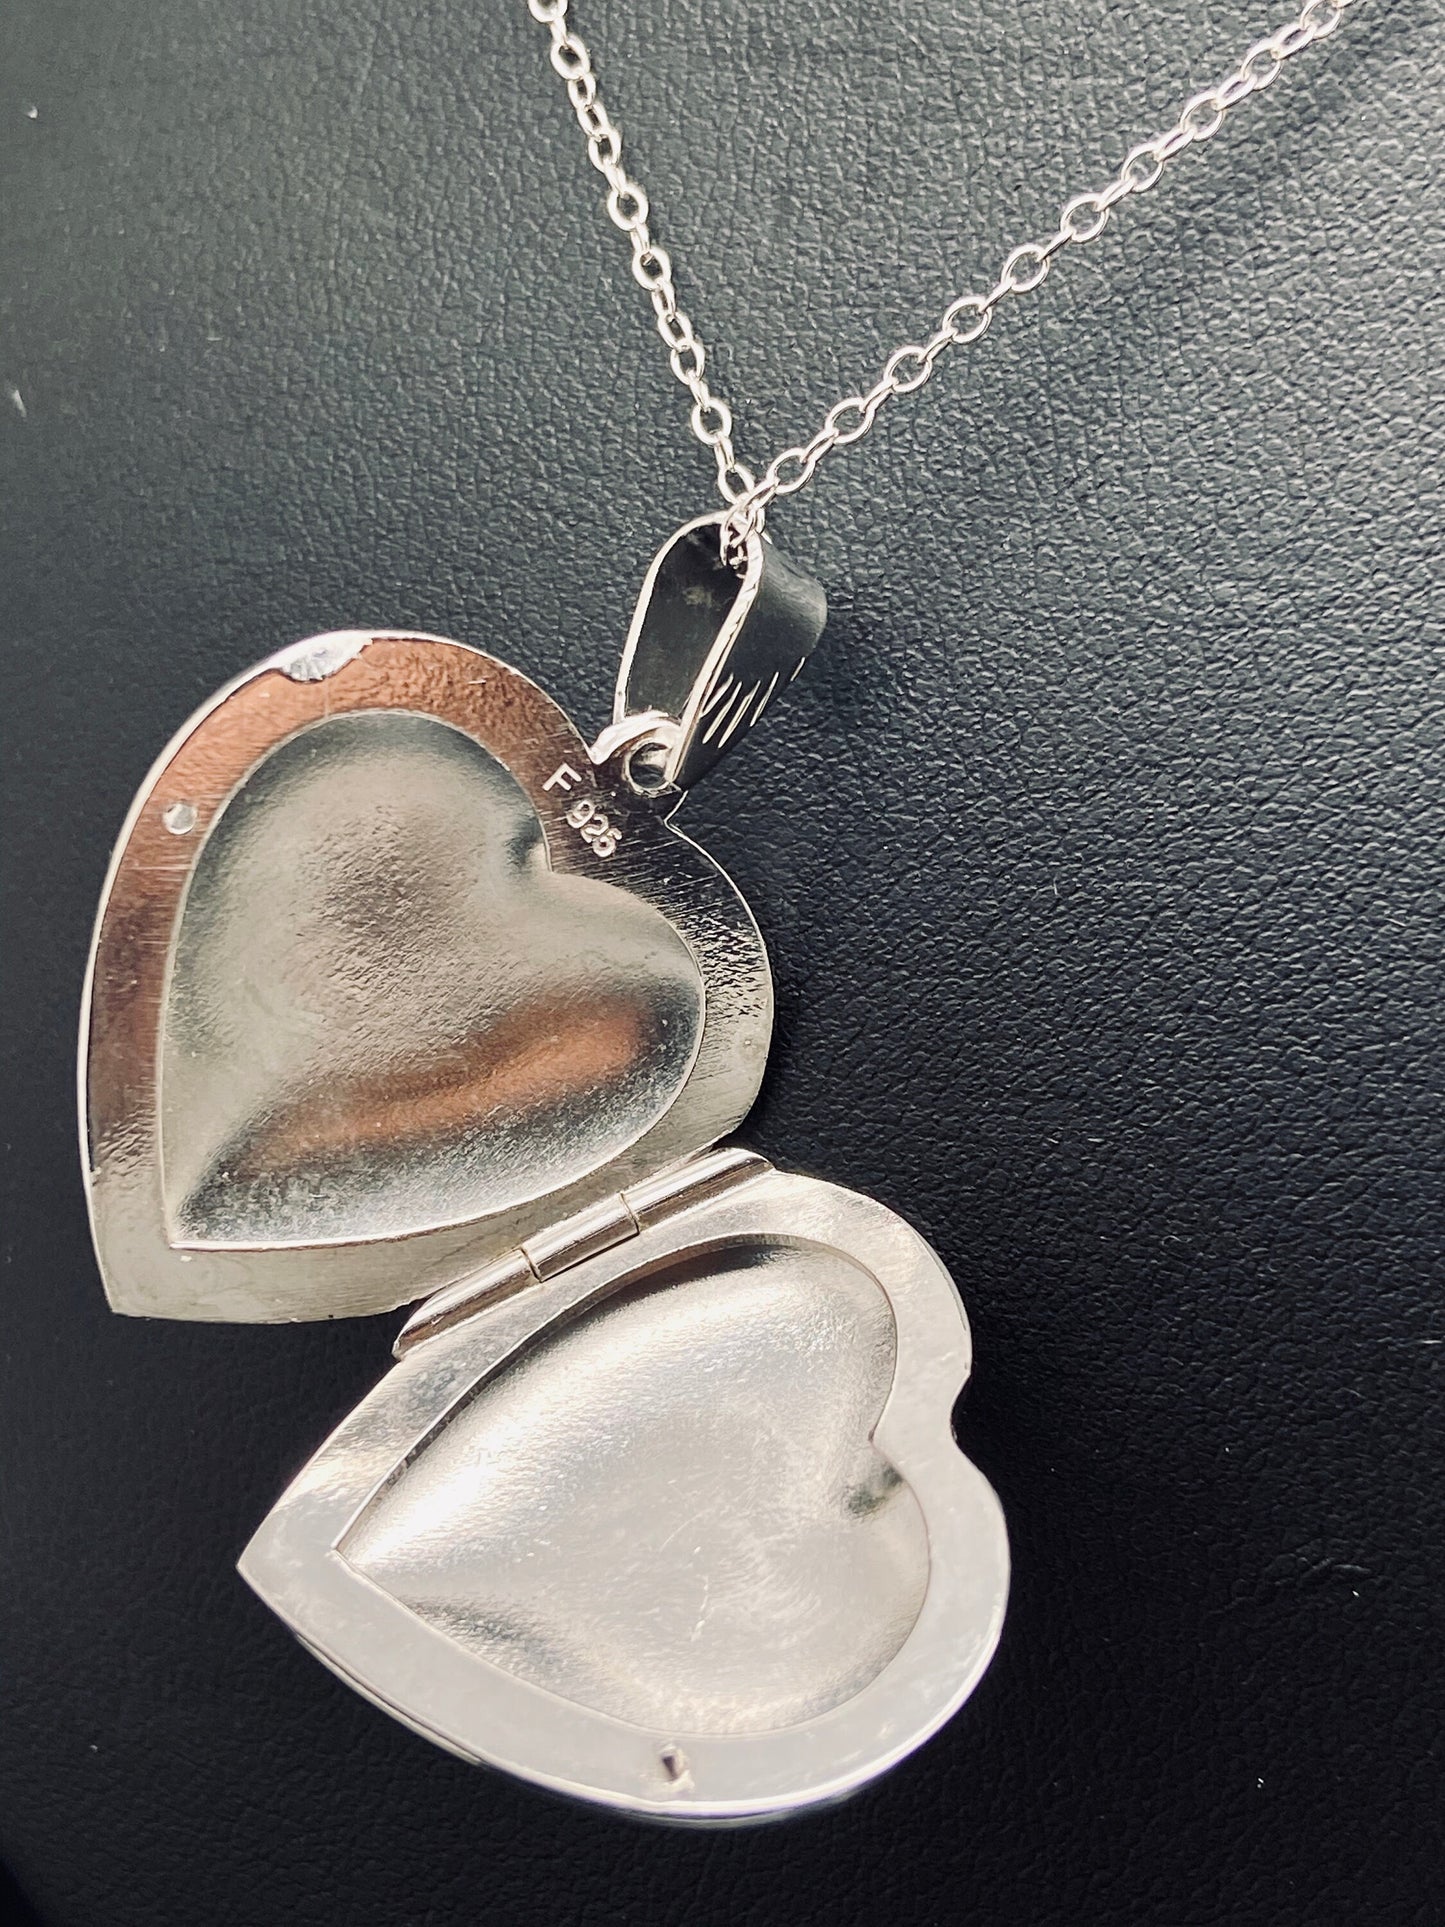 Etched Heart Locket Pendant Chain Necklace